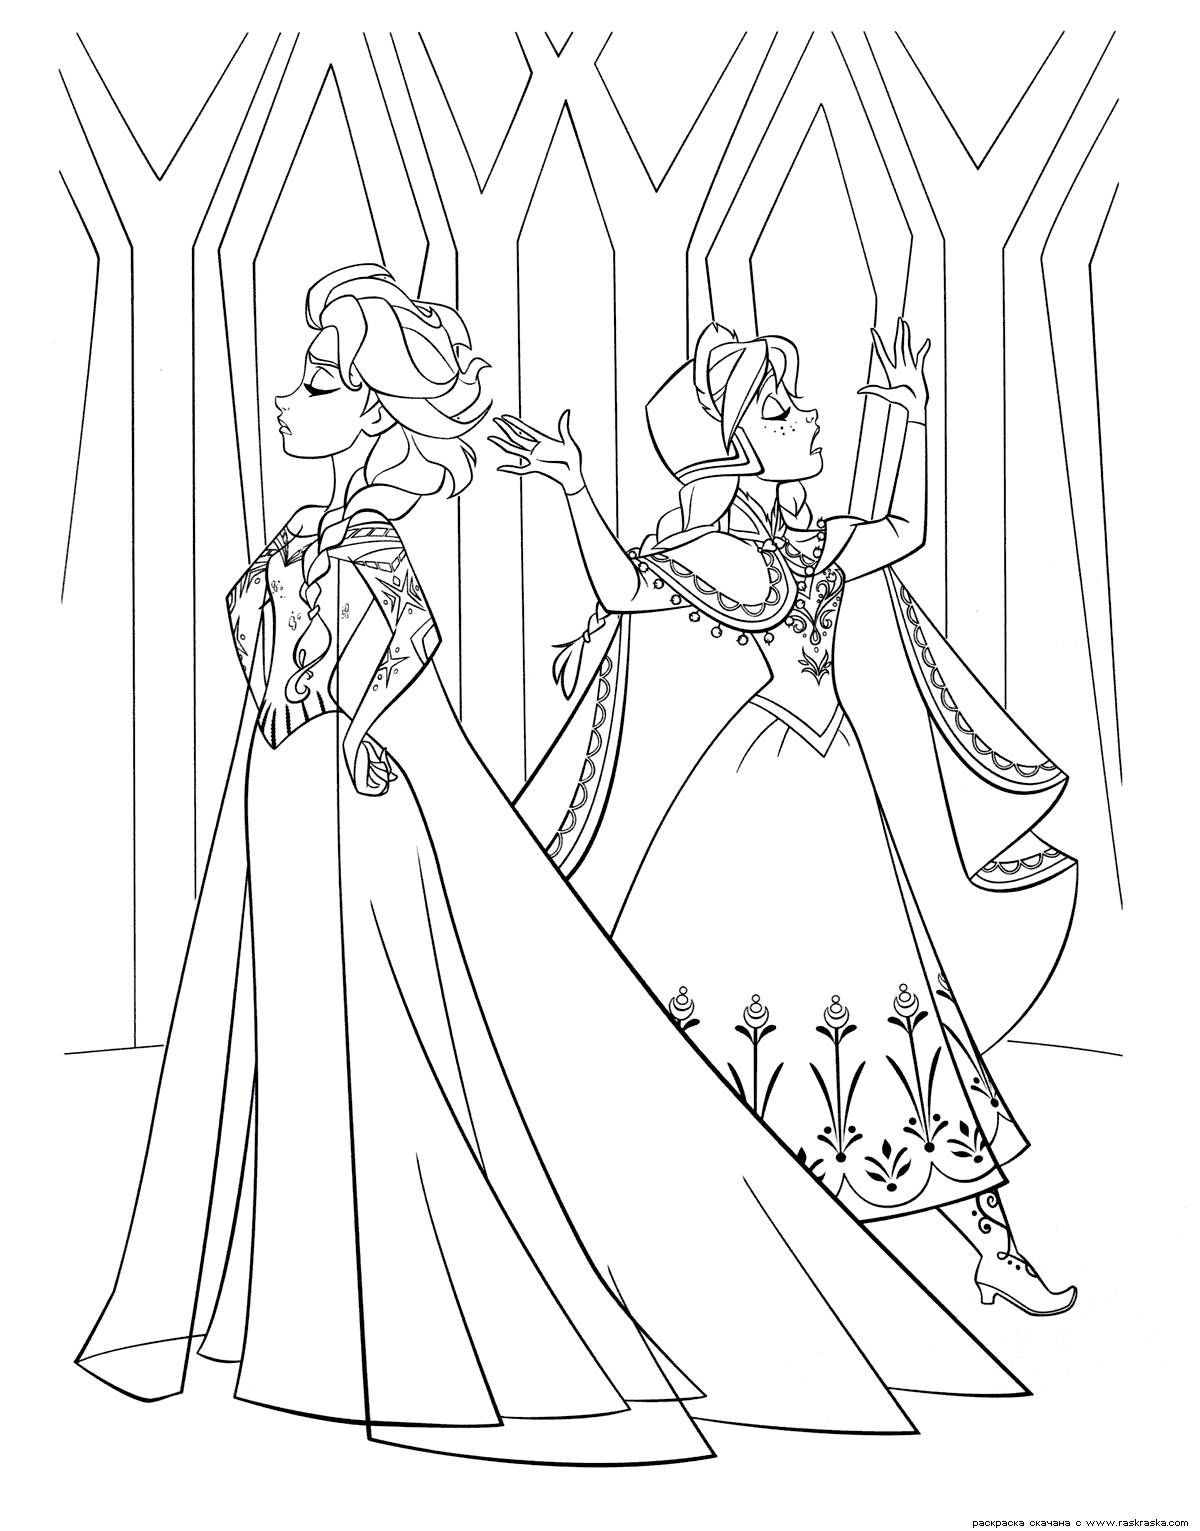 Frozen two princesses coloring page